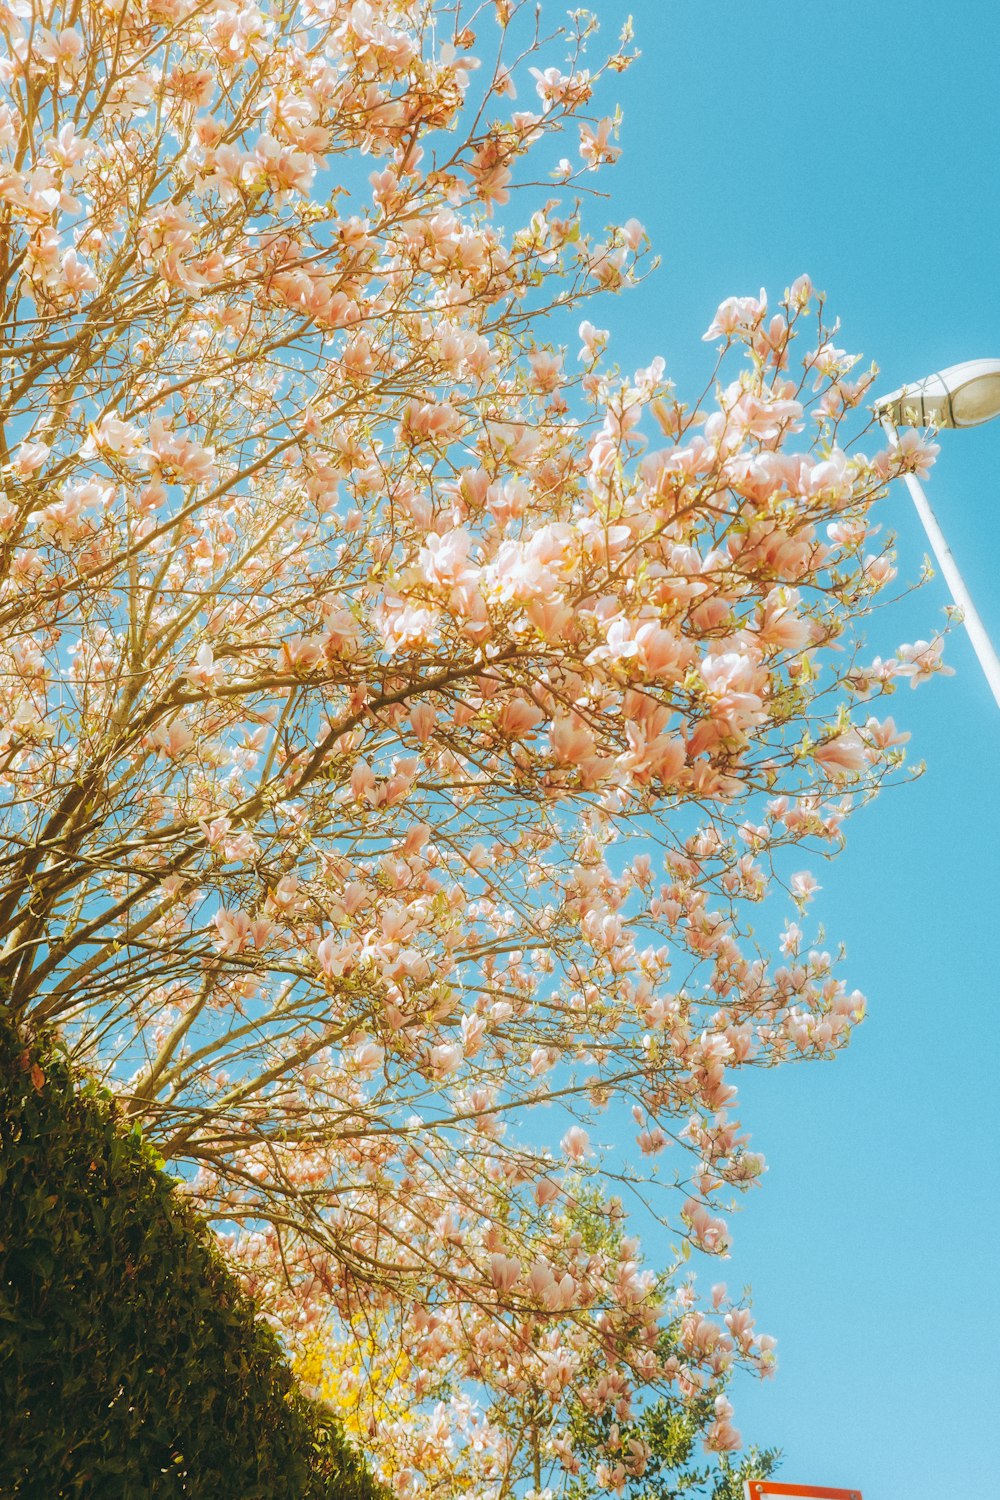 a street light and a tree with pink flowers